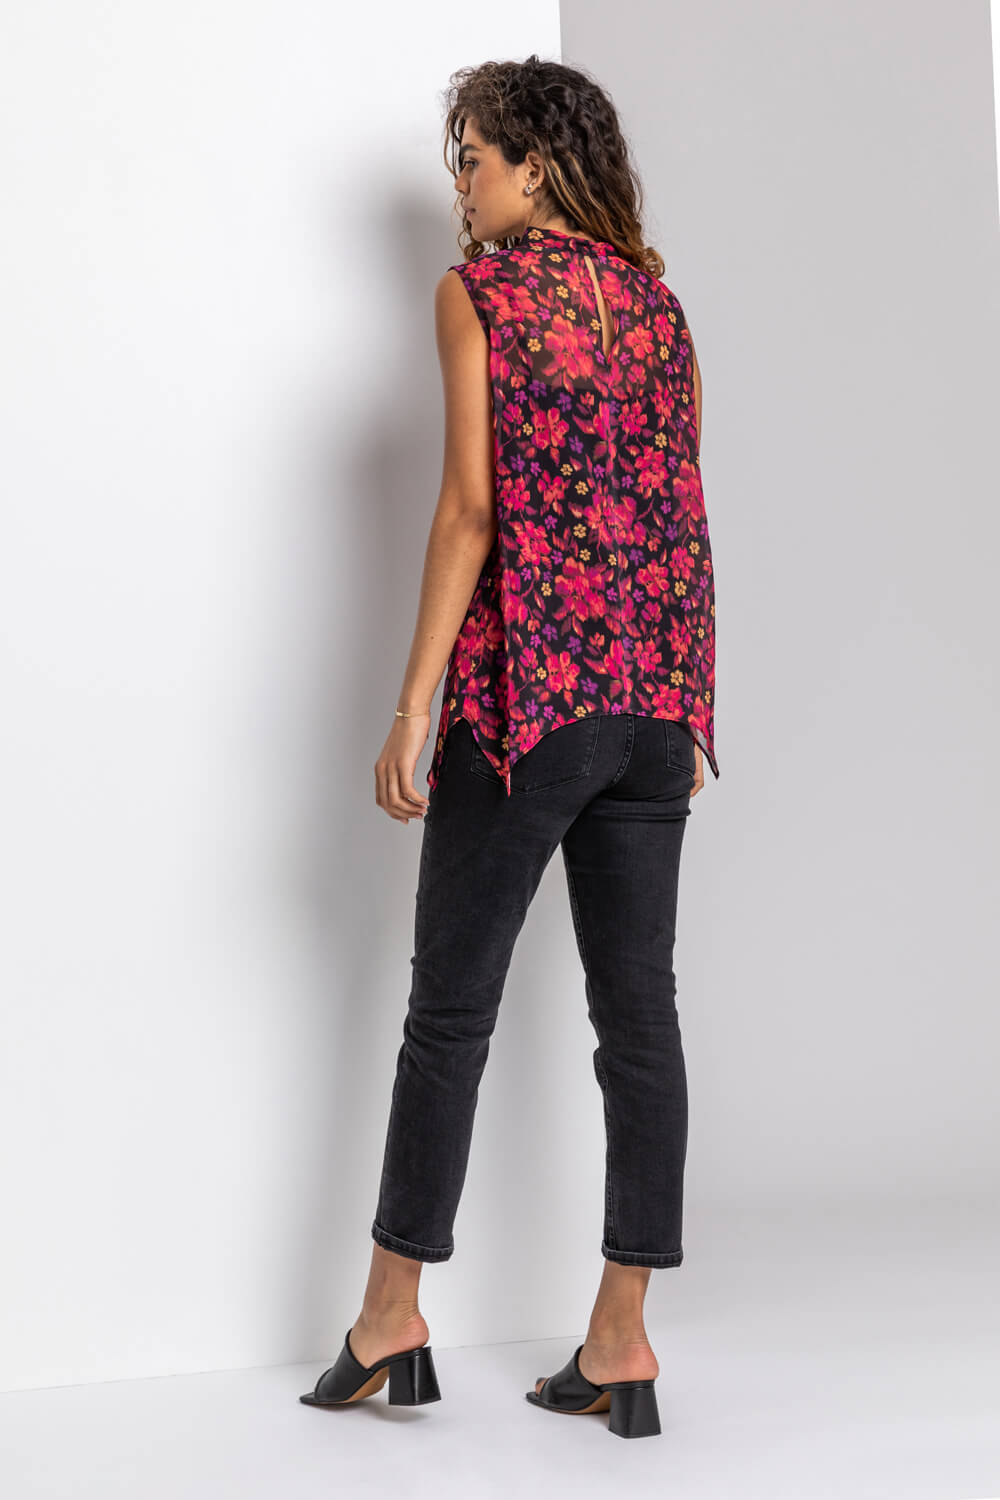 Red Floral Print Keyhole Top, Image 3 of 4